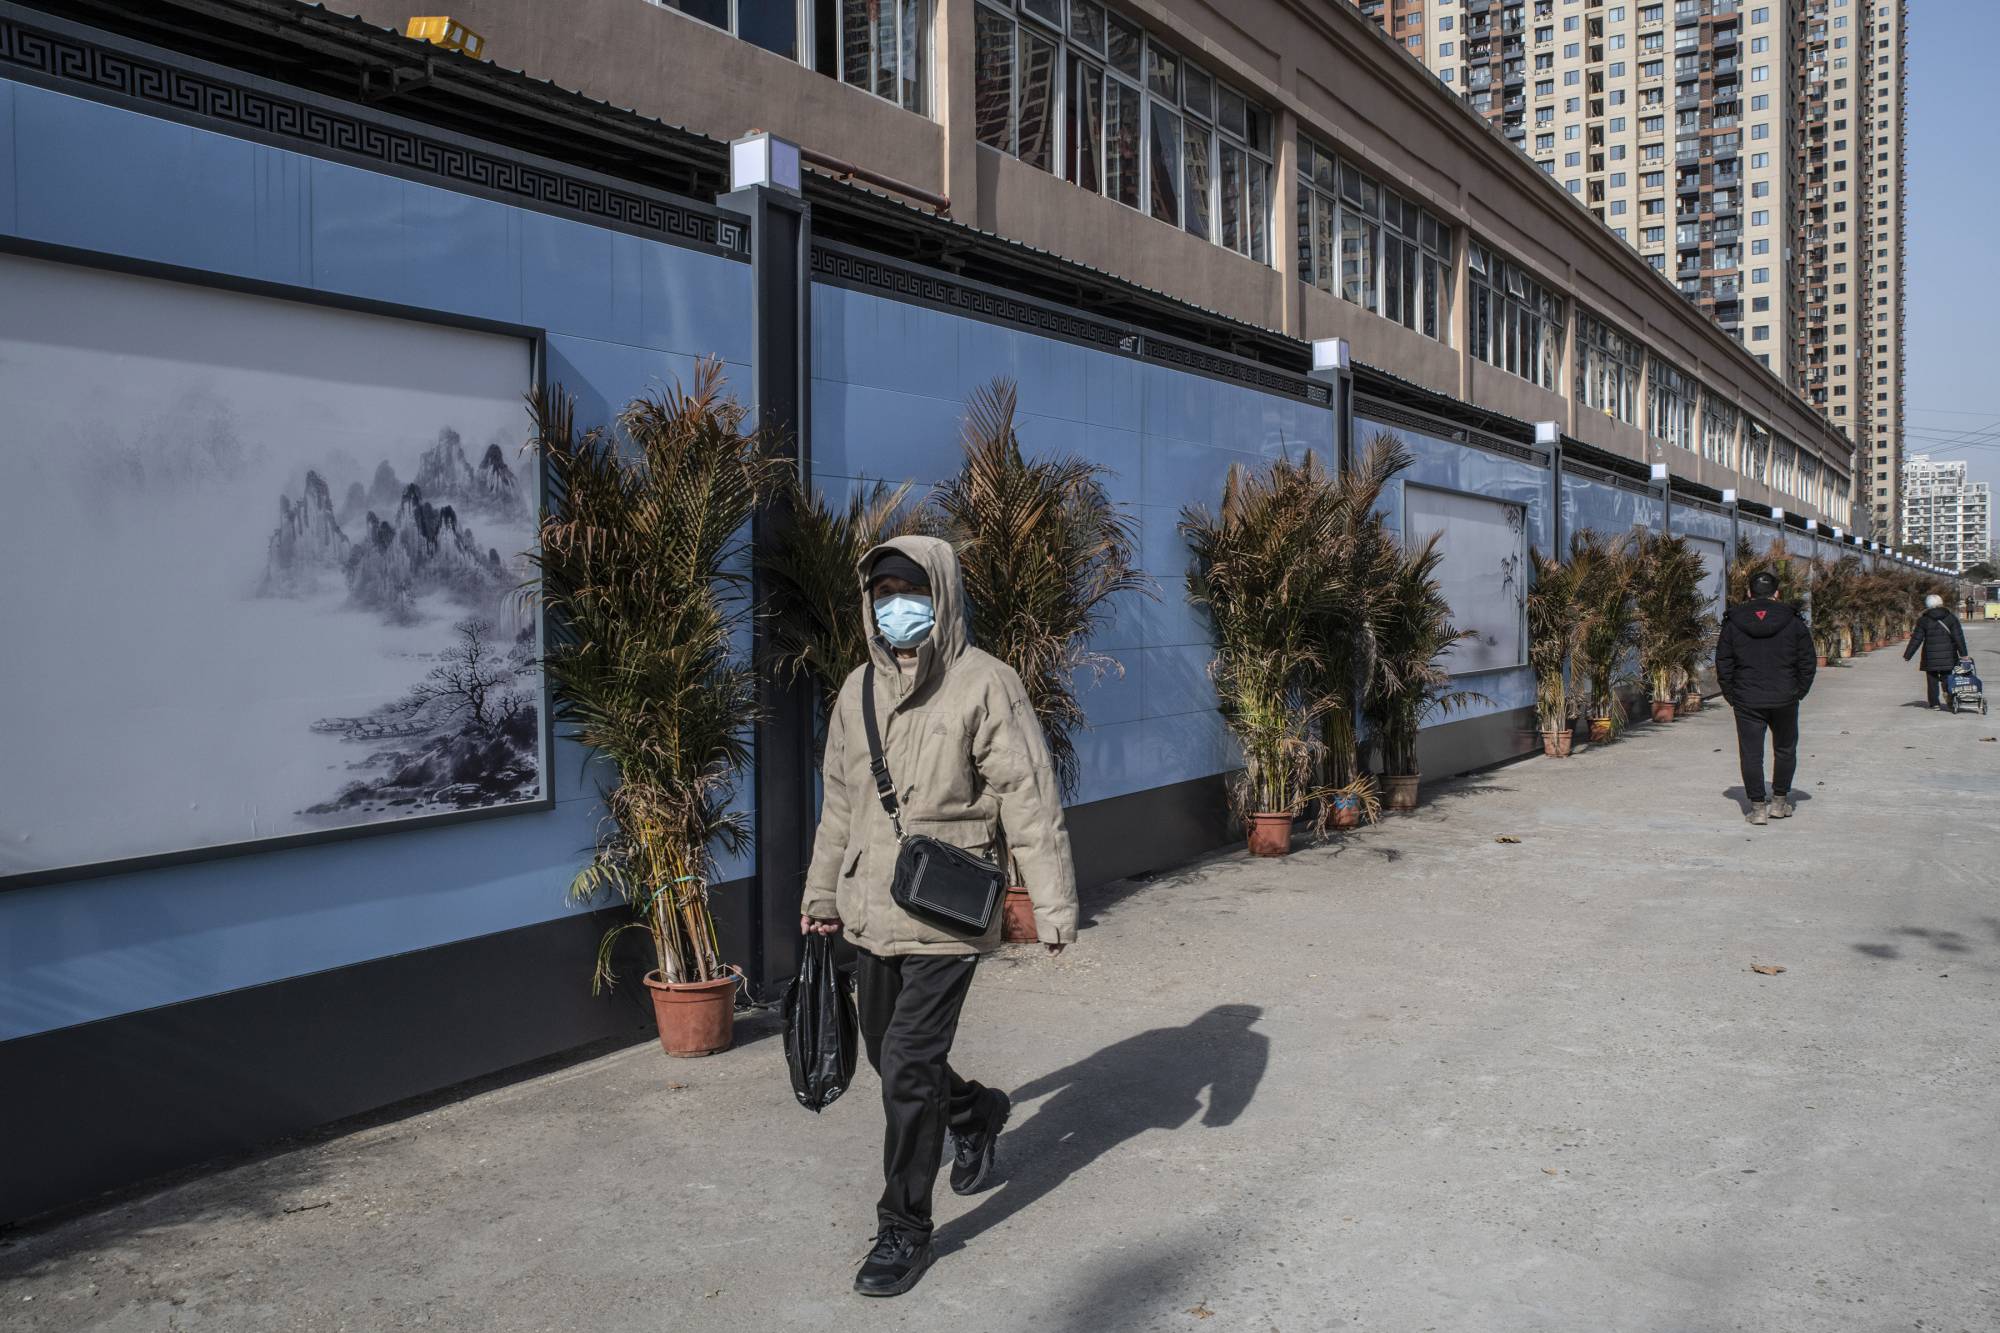 The shuttered Huanan market in Wuhan, China, Jan. 11, 2021. Under government pressure, Chinese scientists have retracted studies and withheld or deleted data about COVID-19 — the censorship has stymied efforts to understand the virus.  | GILLES SABRIé / THE NEW YORK TIMES